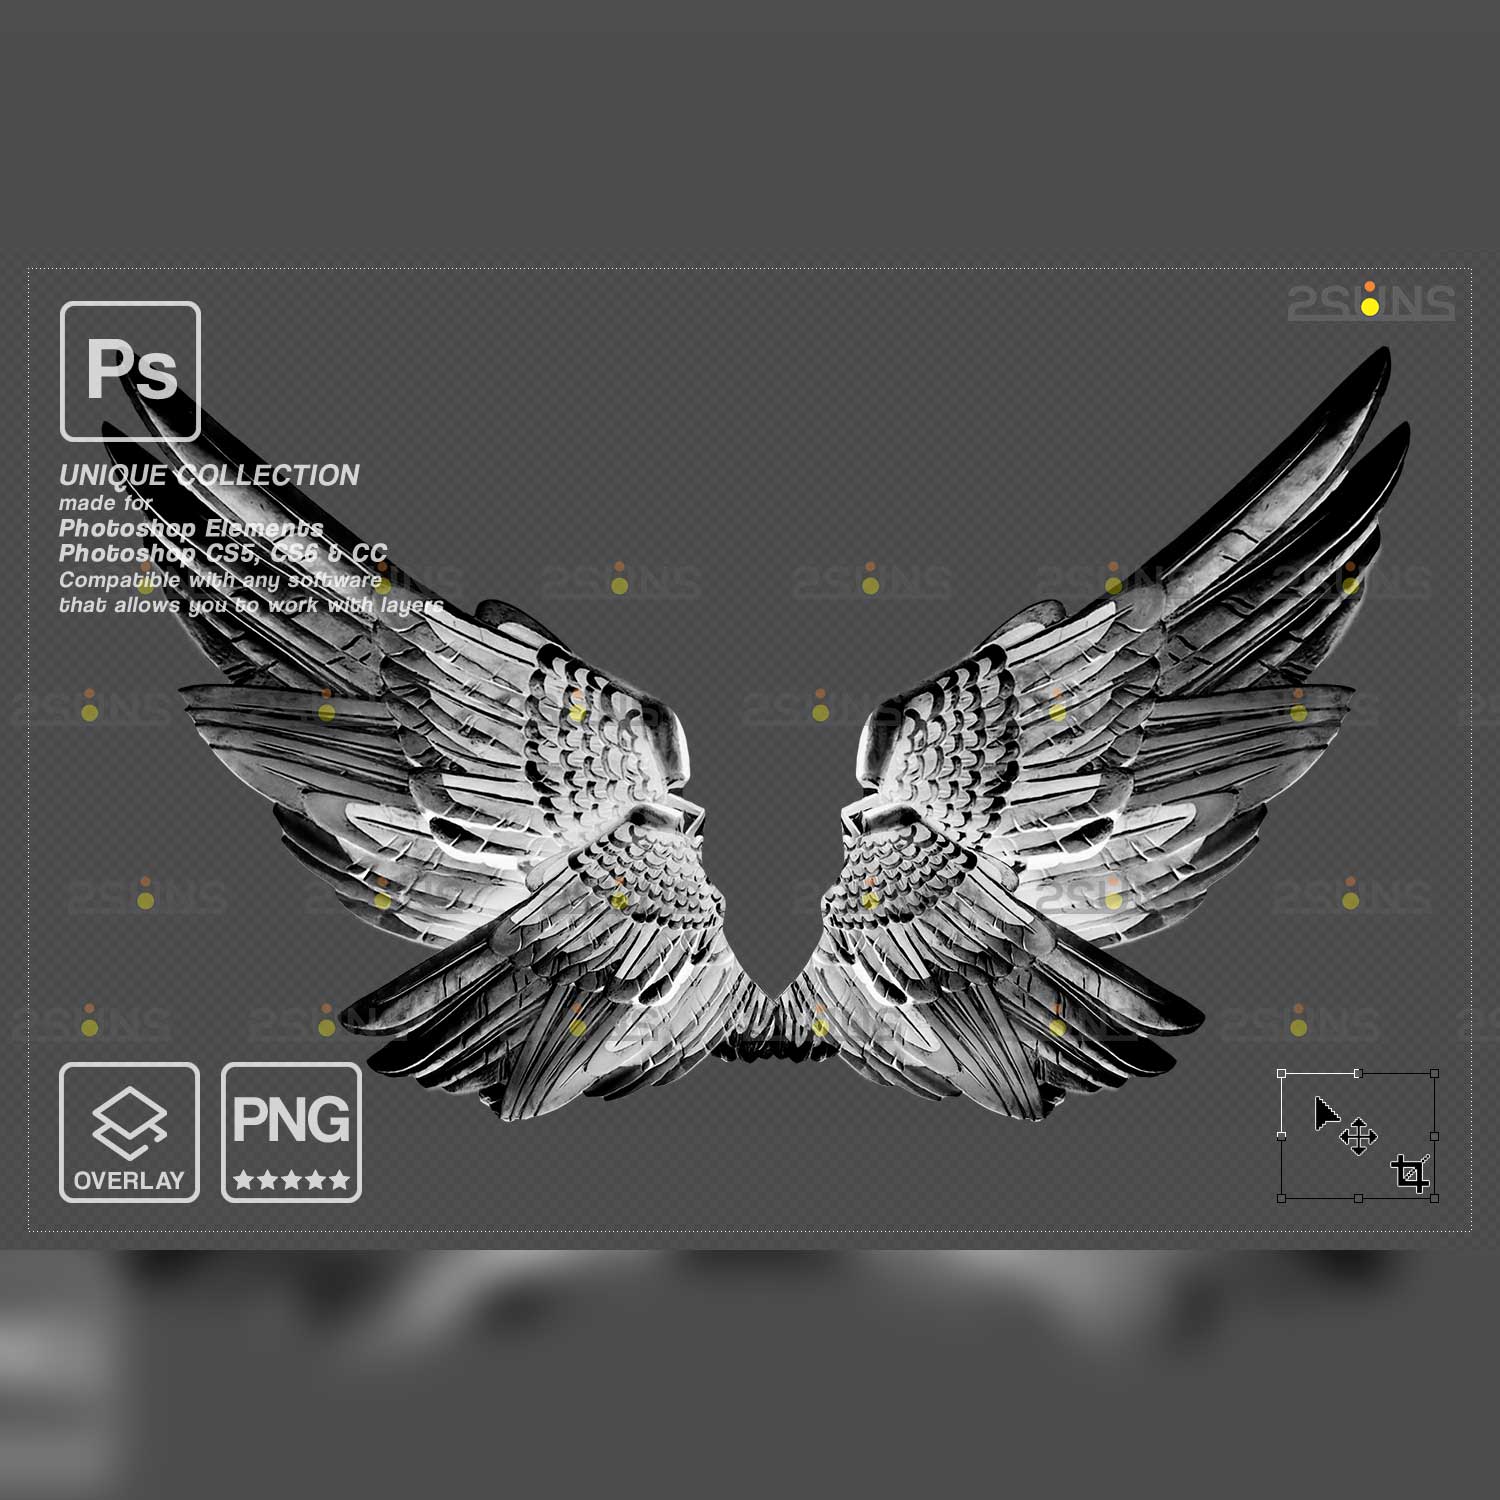 Realistic White Black Gold Angel Wings Photoshop Overlays two black angel wings.